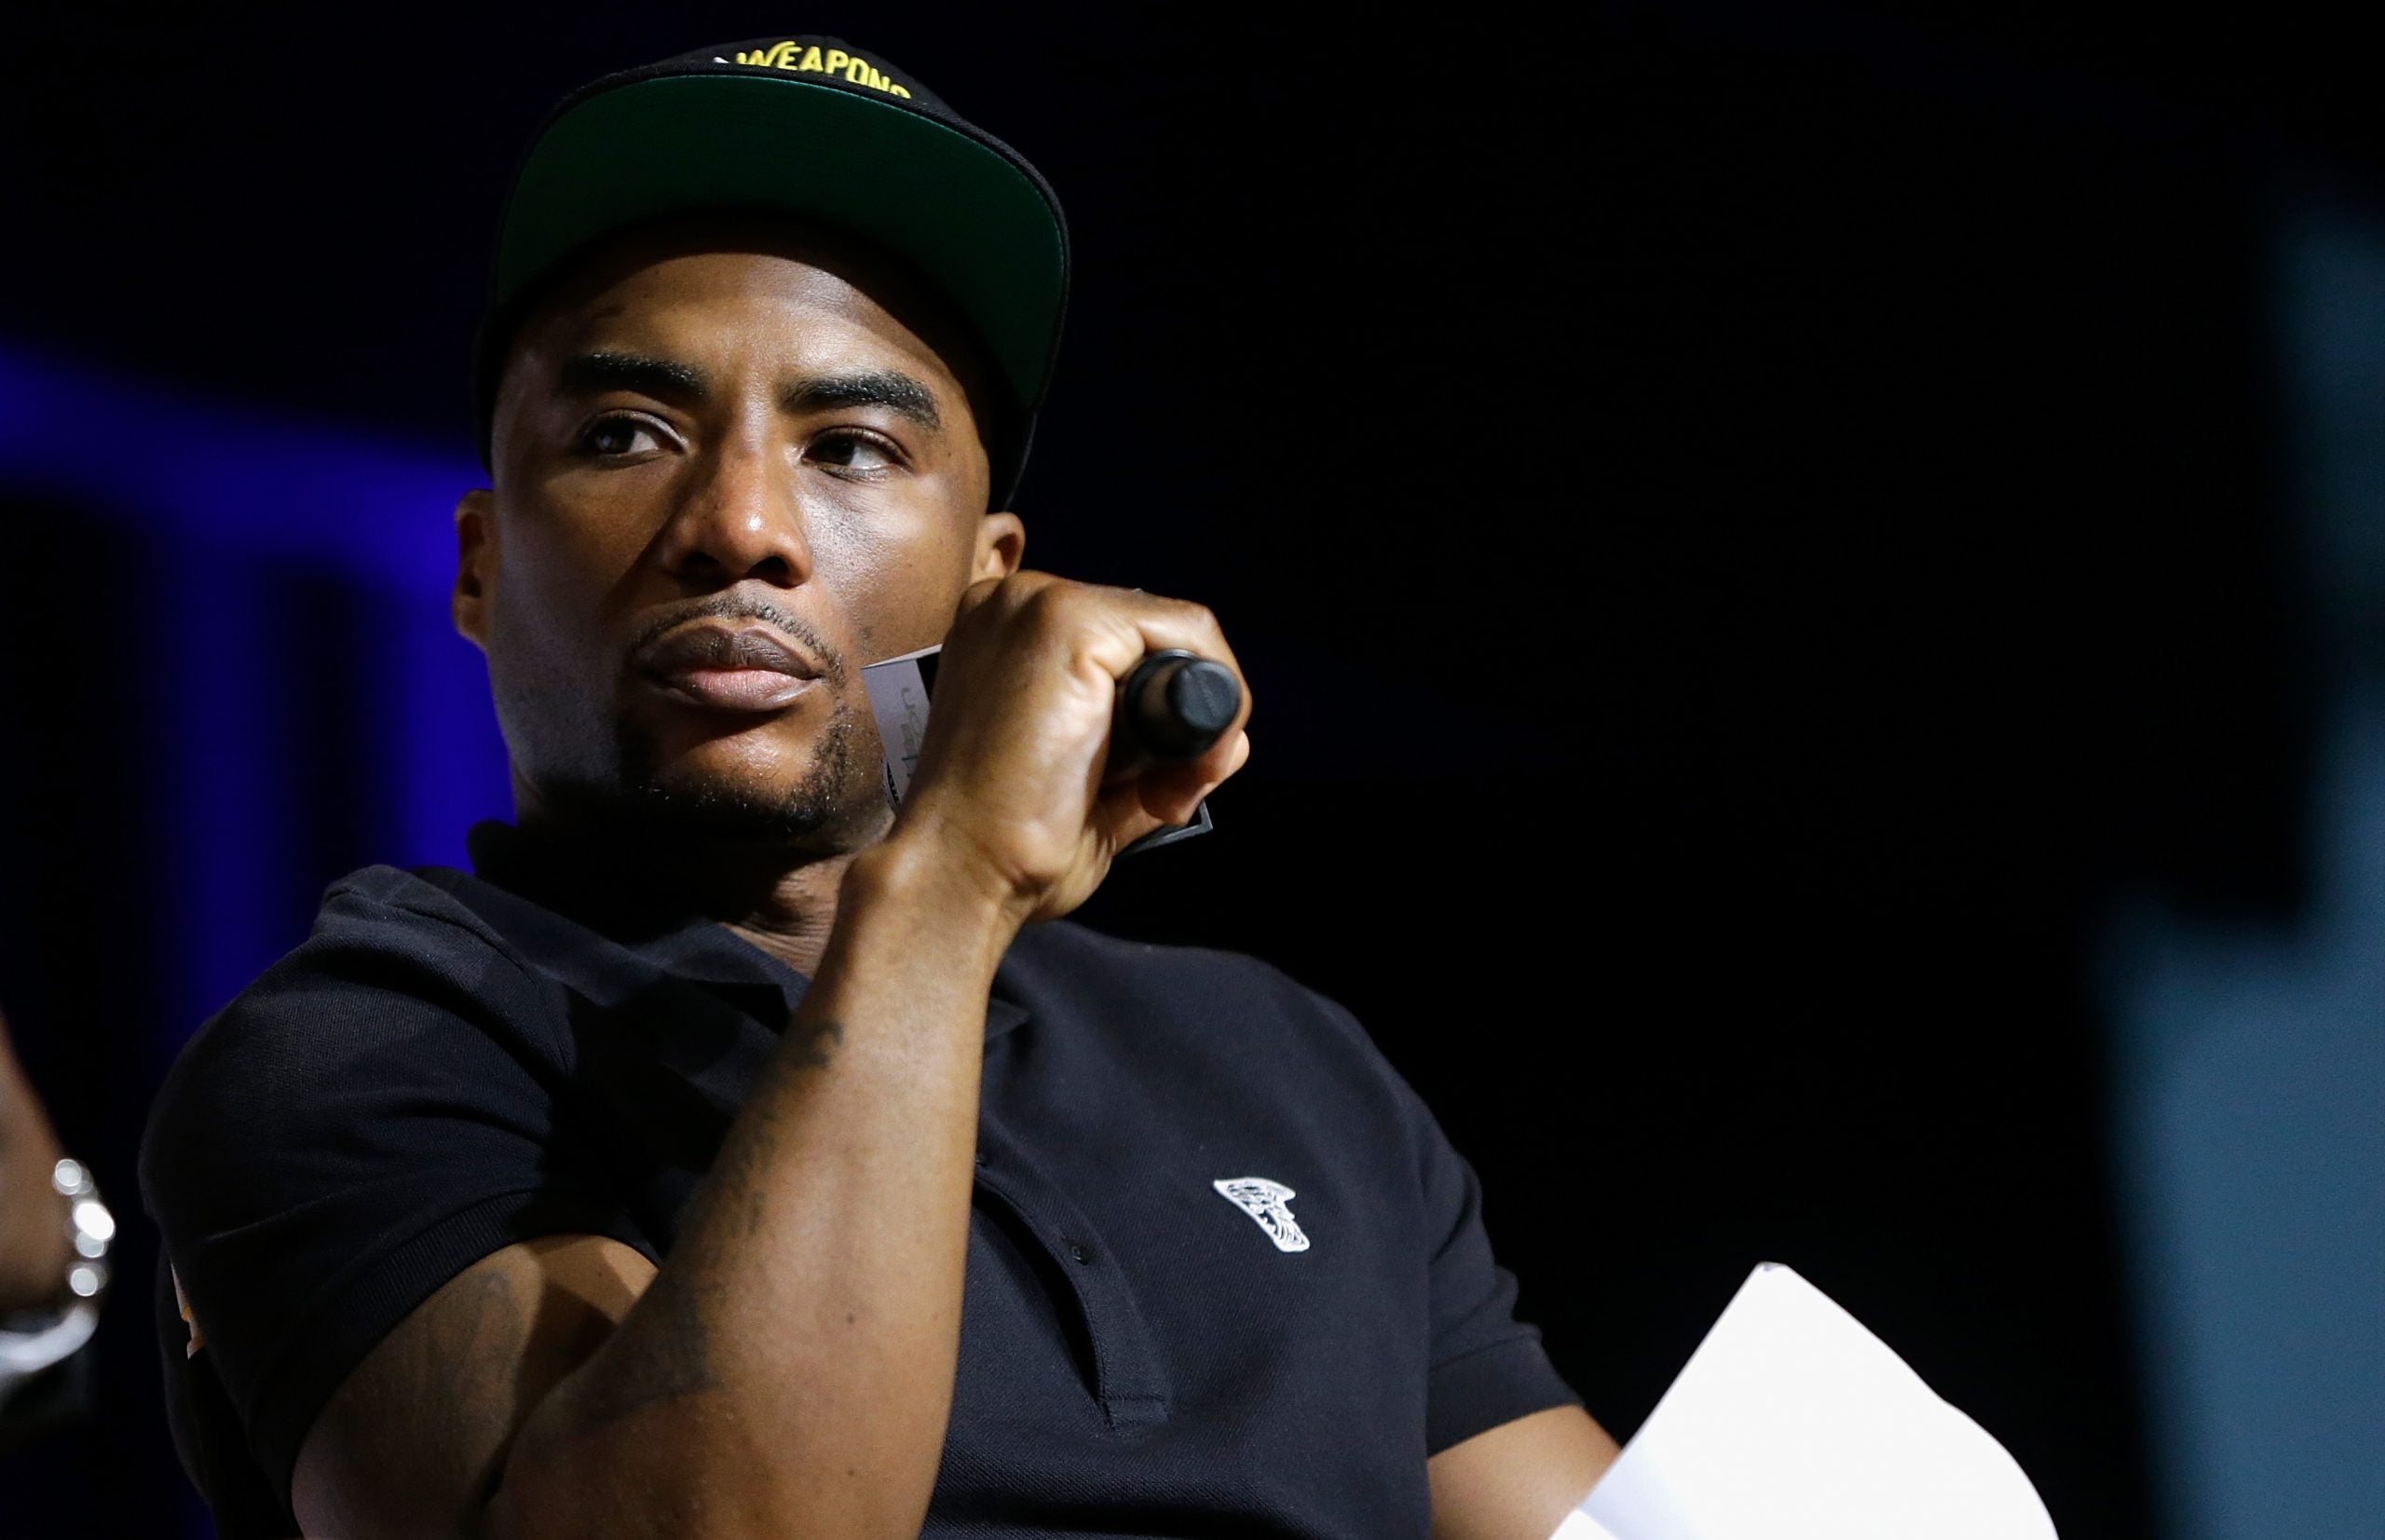 Charlamagne Tha God Speaks On What Social Distancing Is Teaching Us